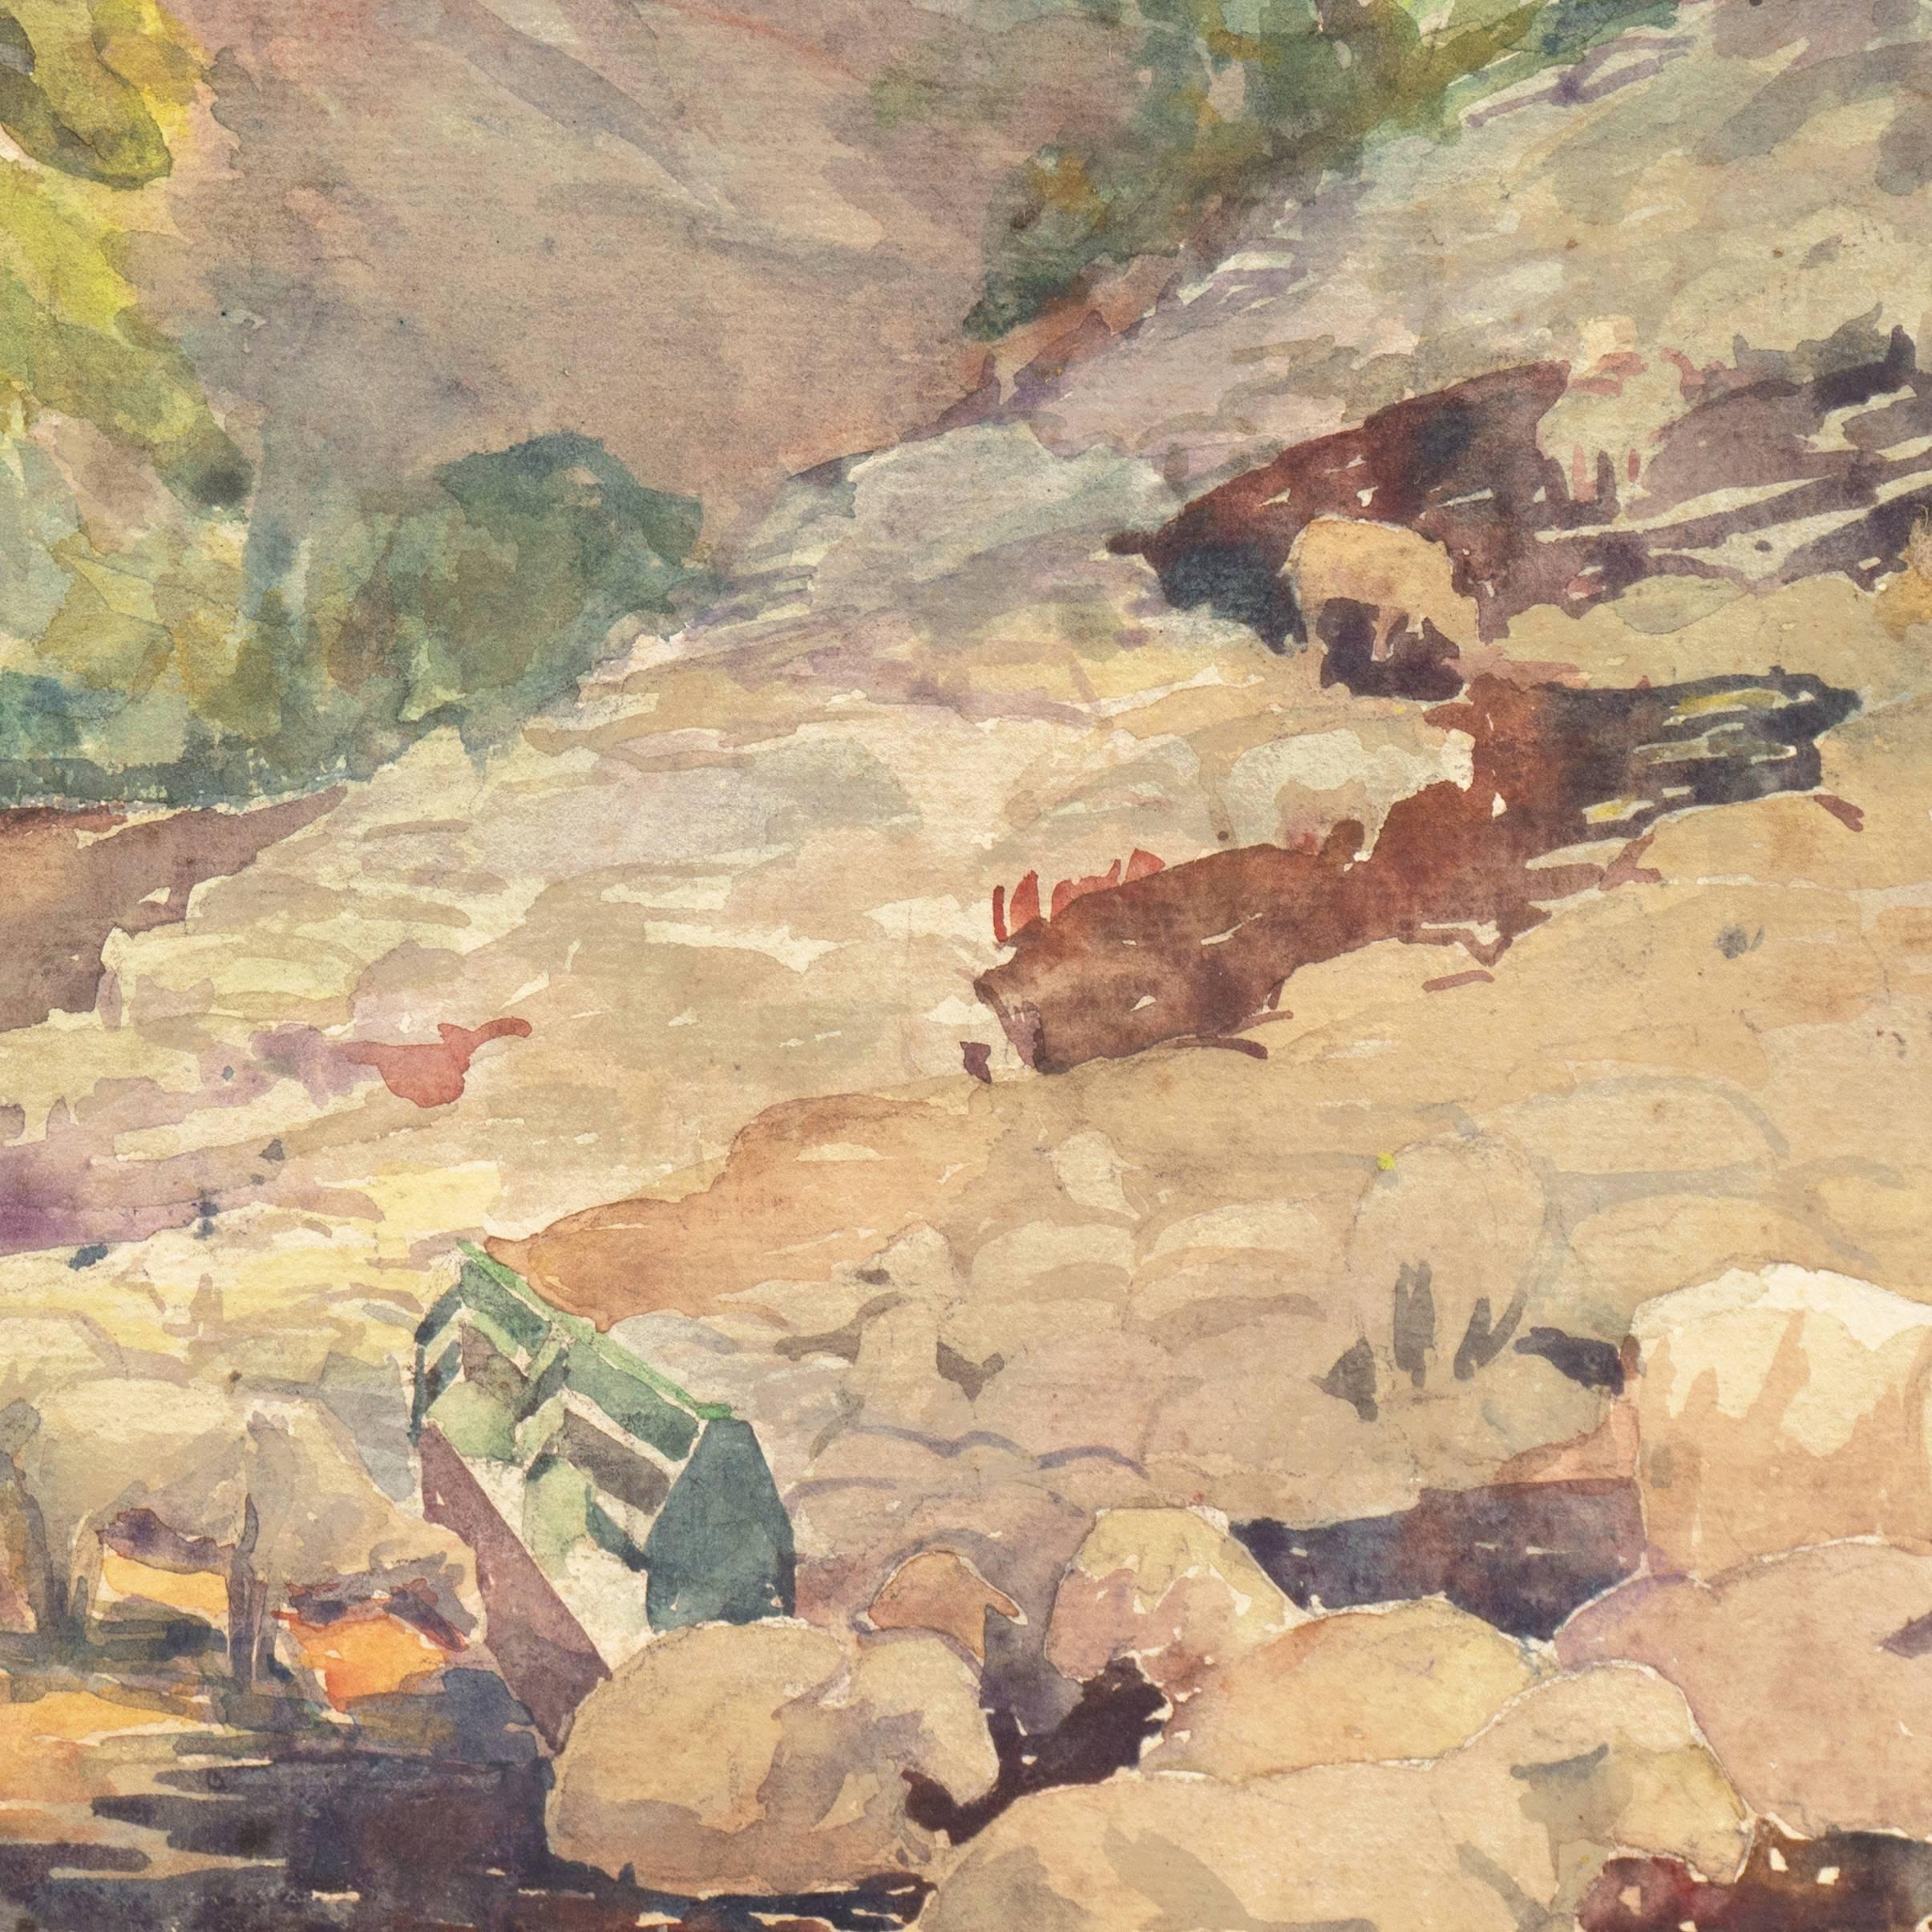 'Landscape with Sheep Grazing', Art Institute of Chicago, Woman Artist 2